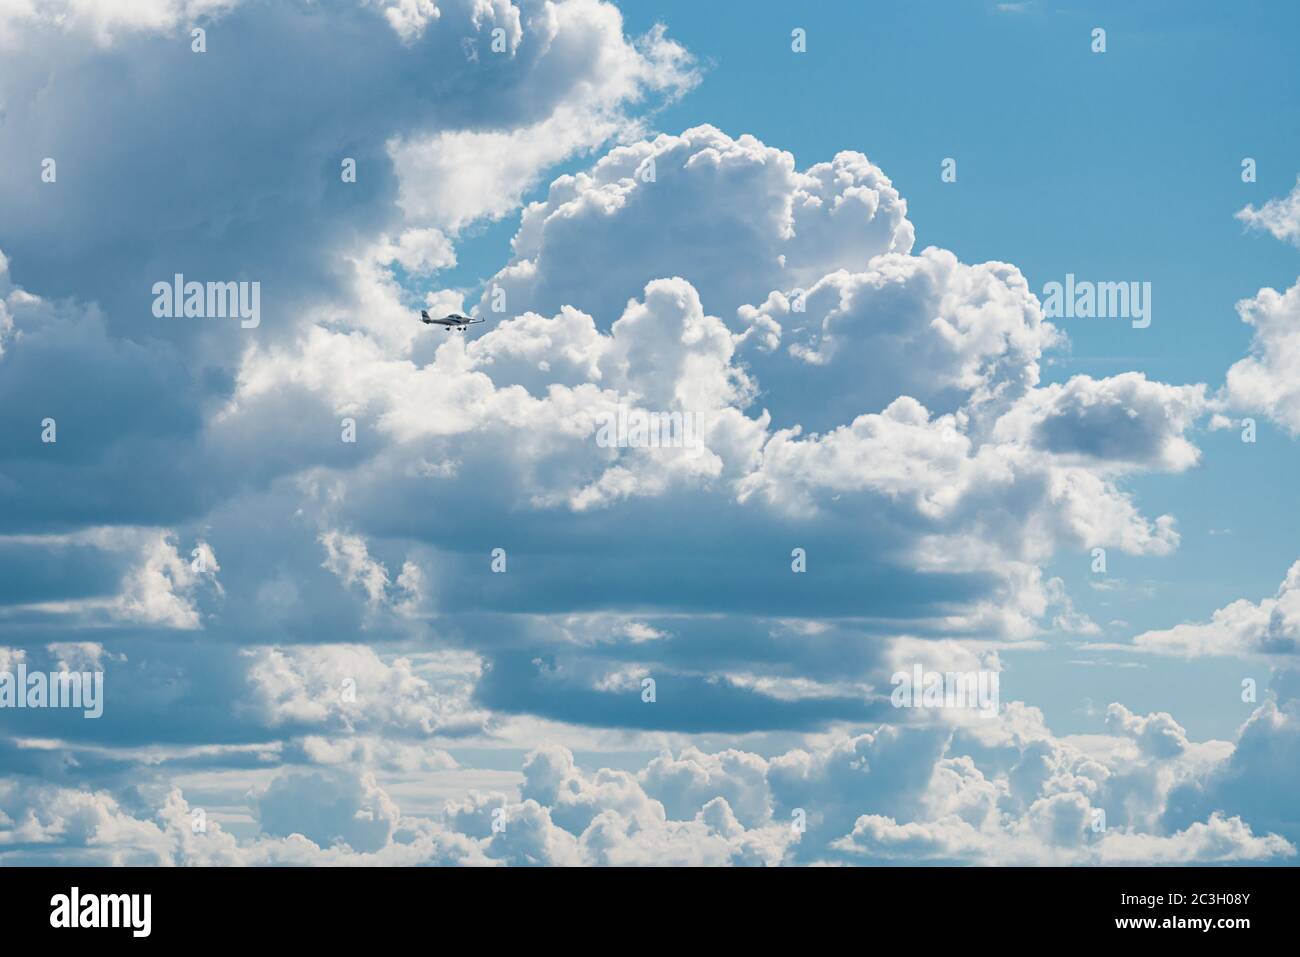 A small motor plane in front of giant clouds after the storm. The clouds break open and blue sky appears. Stock Photo